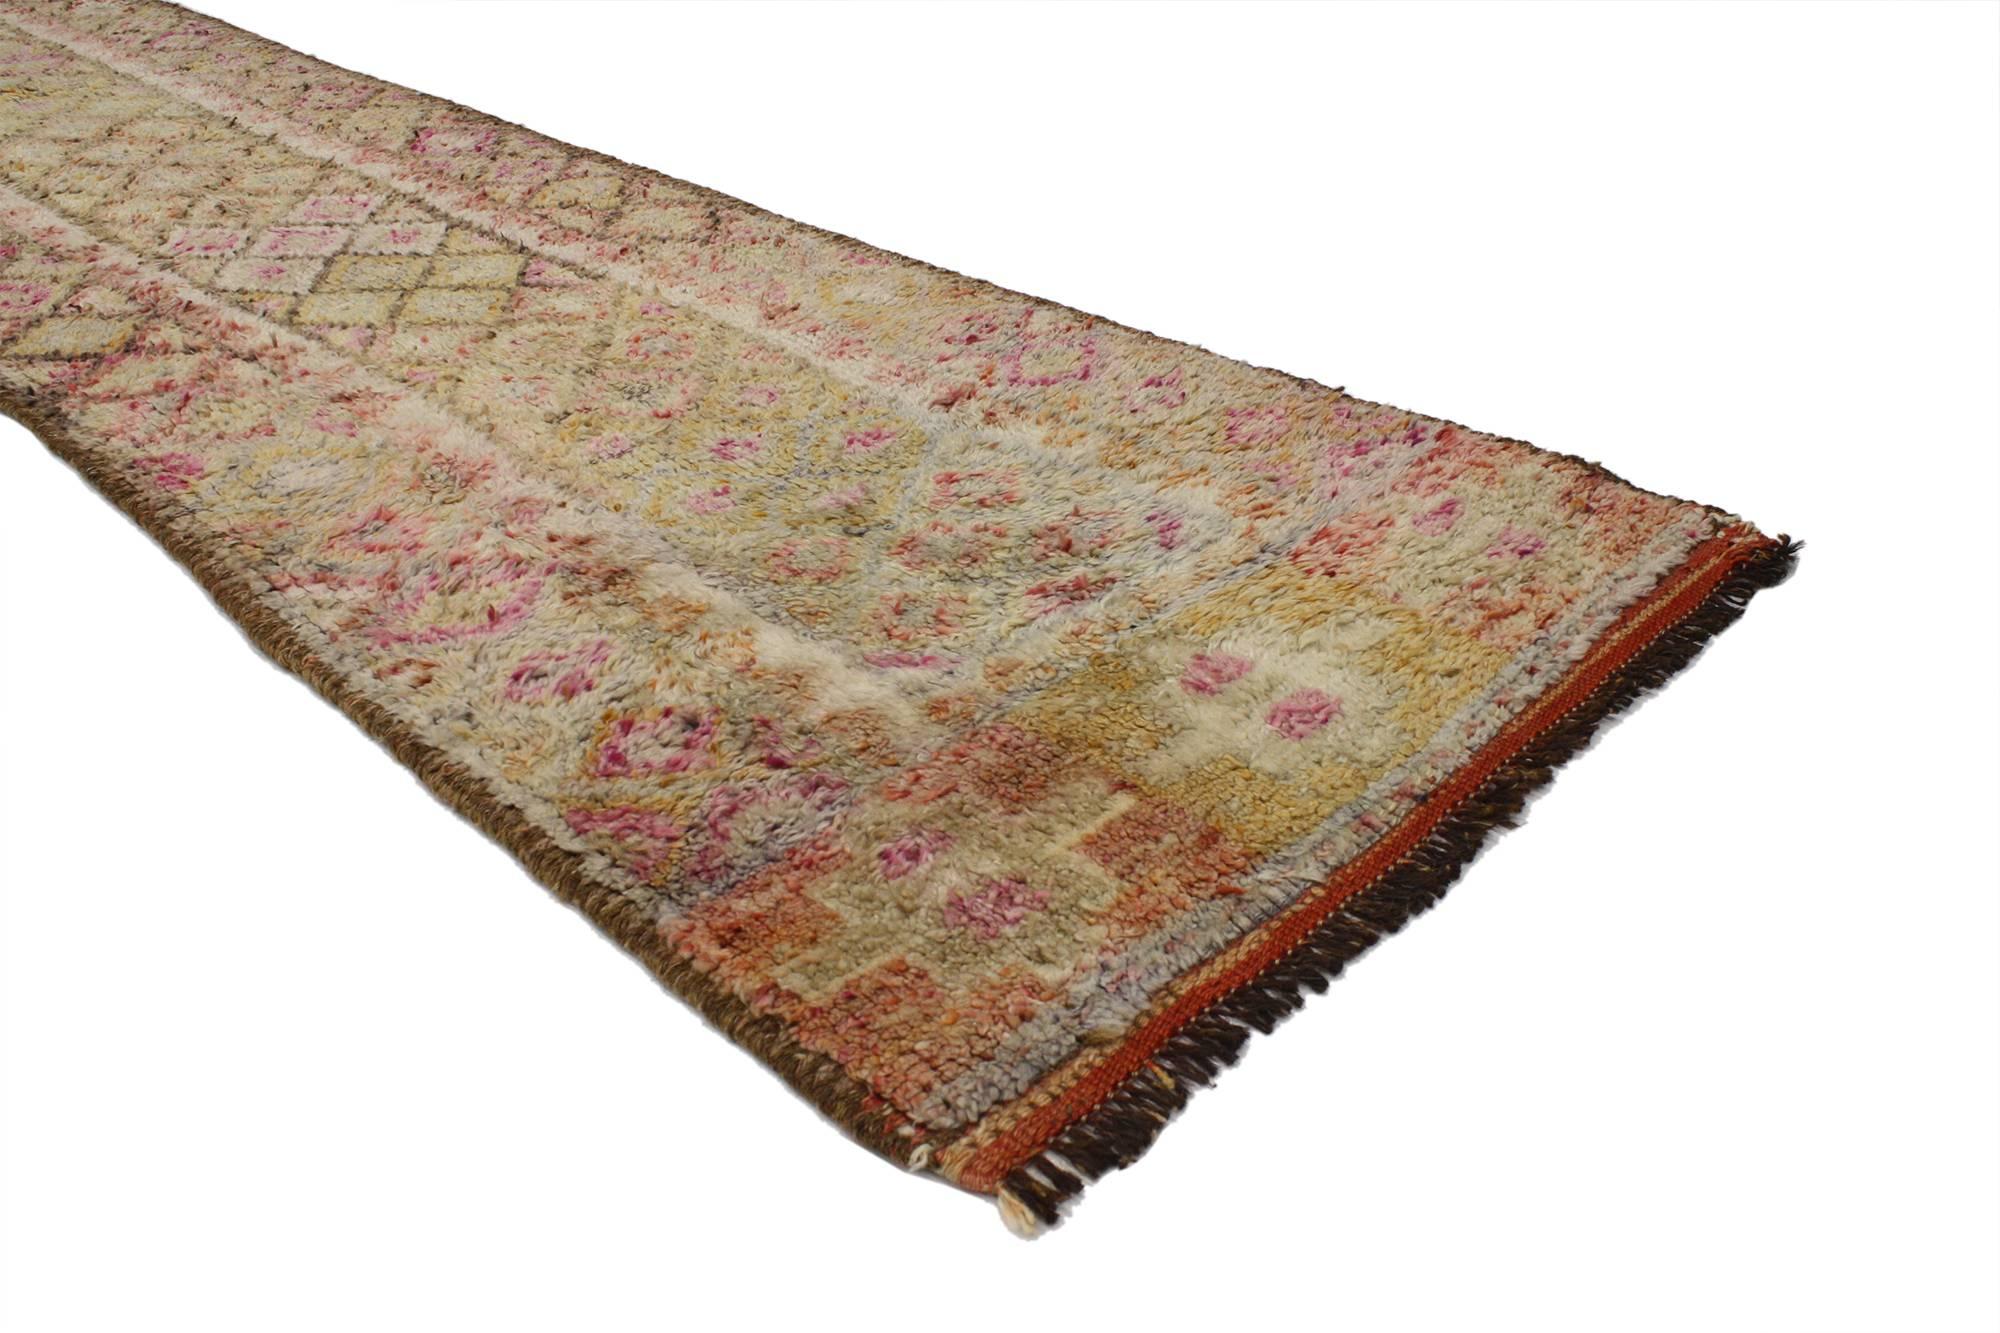 52064, vintage Turkish Oushak runner, long and narrow hallway. This hand-knotted wool vintage Turkish Oushak runner with tribal style features an allover diamond lozenge pattern in an abrashed field. A compartmental border composed of rosettes and